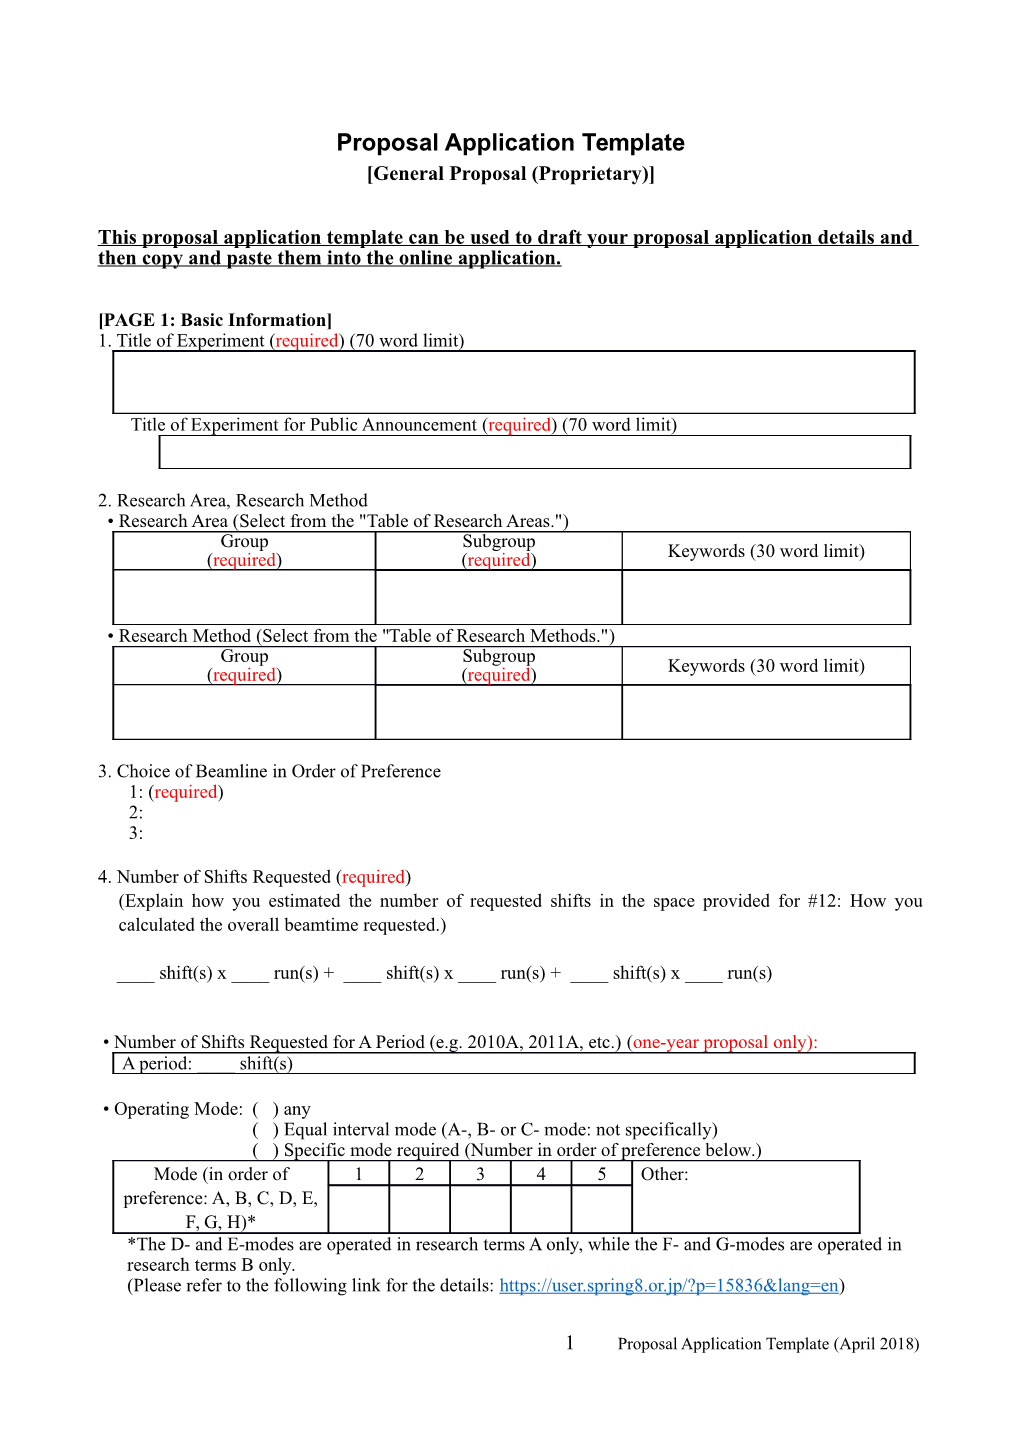 Proposal Application Template